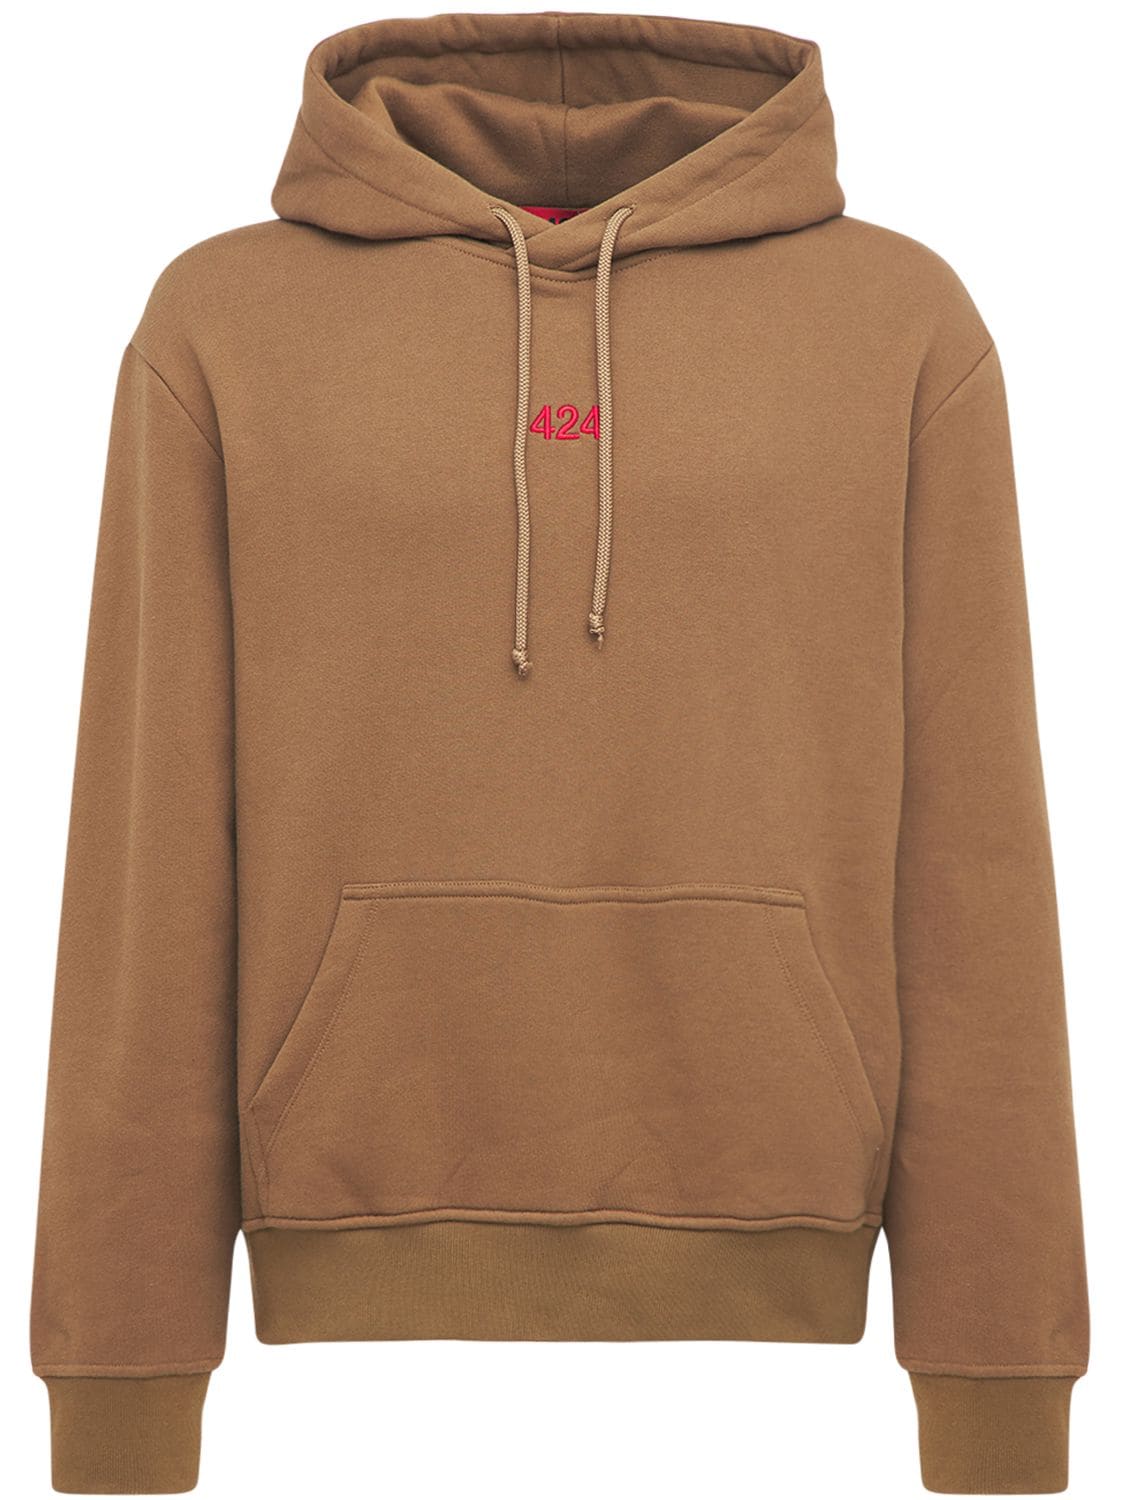 424 COTTON HOODIE W/ EMBROIDERED LOGO